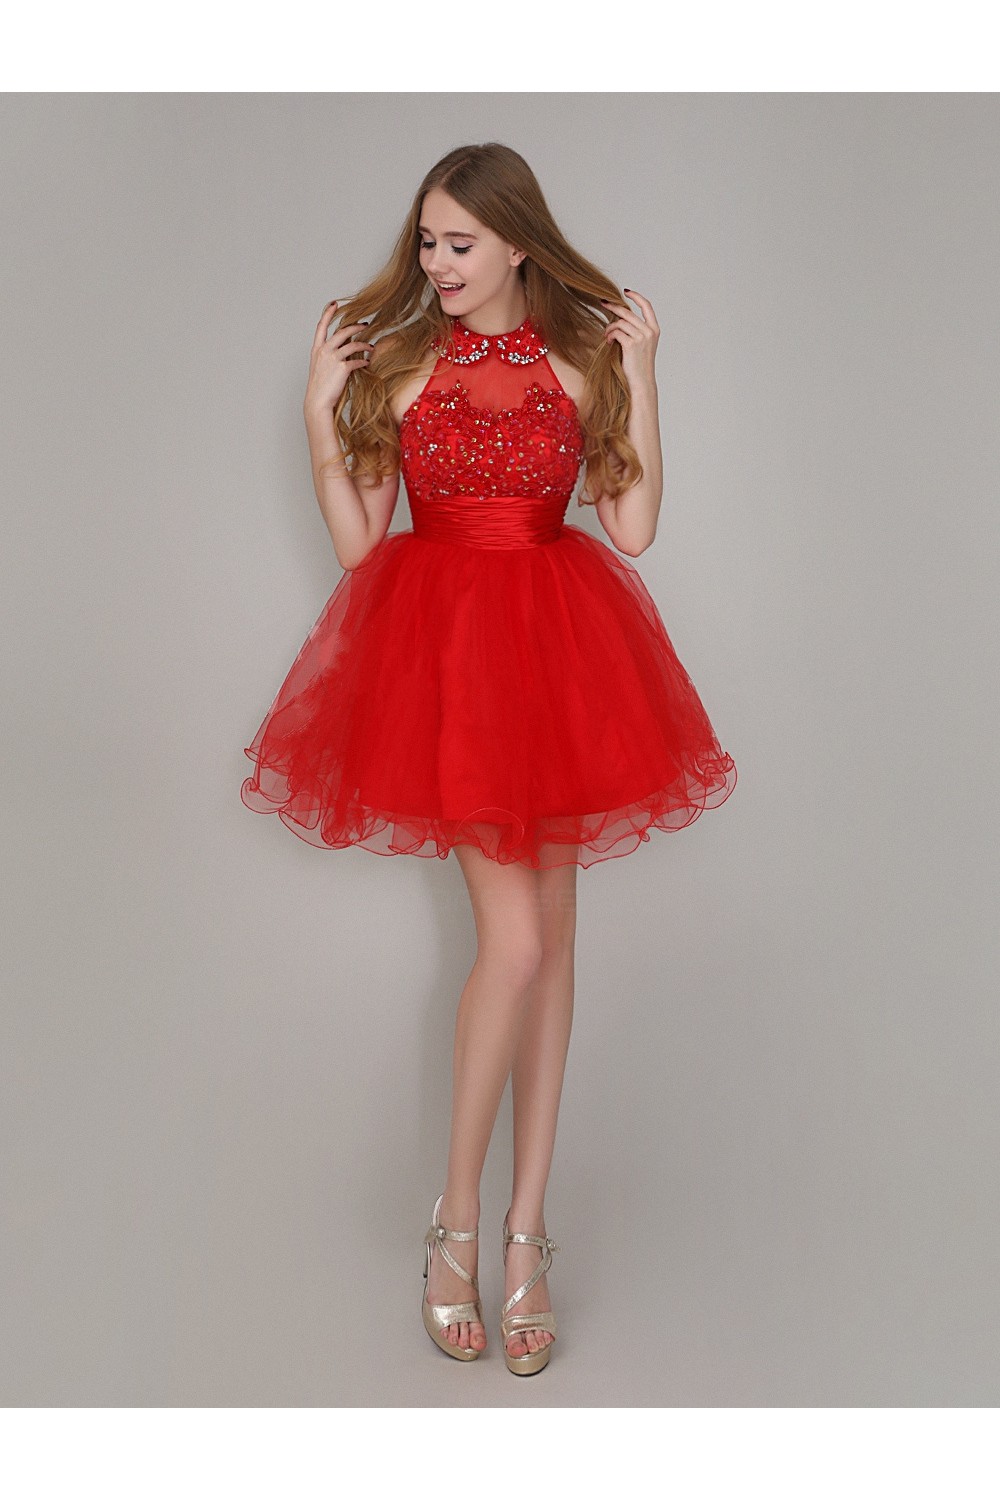 Short Mini Red Beaded Prom Evening Formal Party Dresses Ed010712